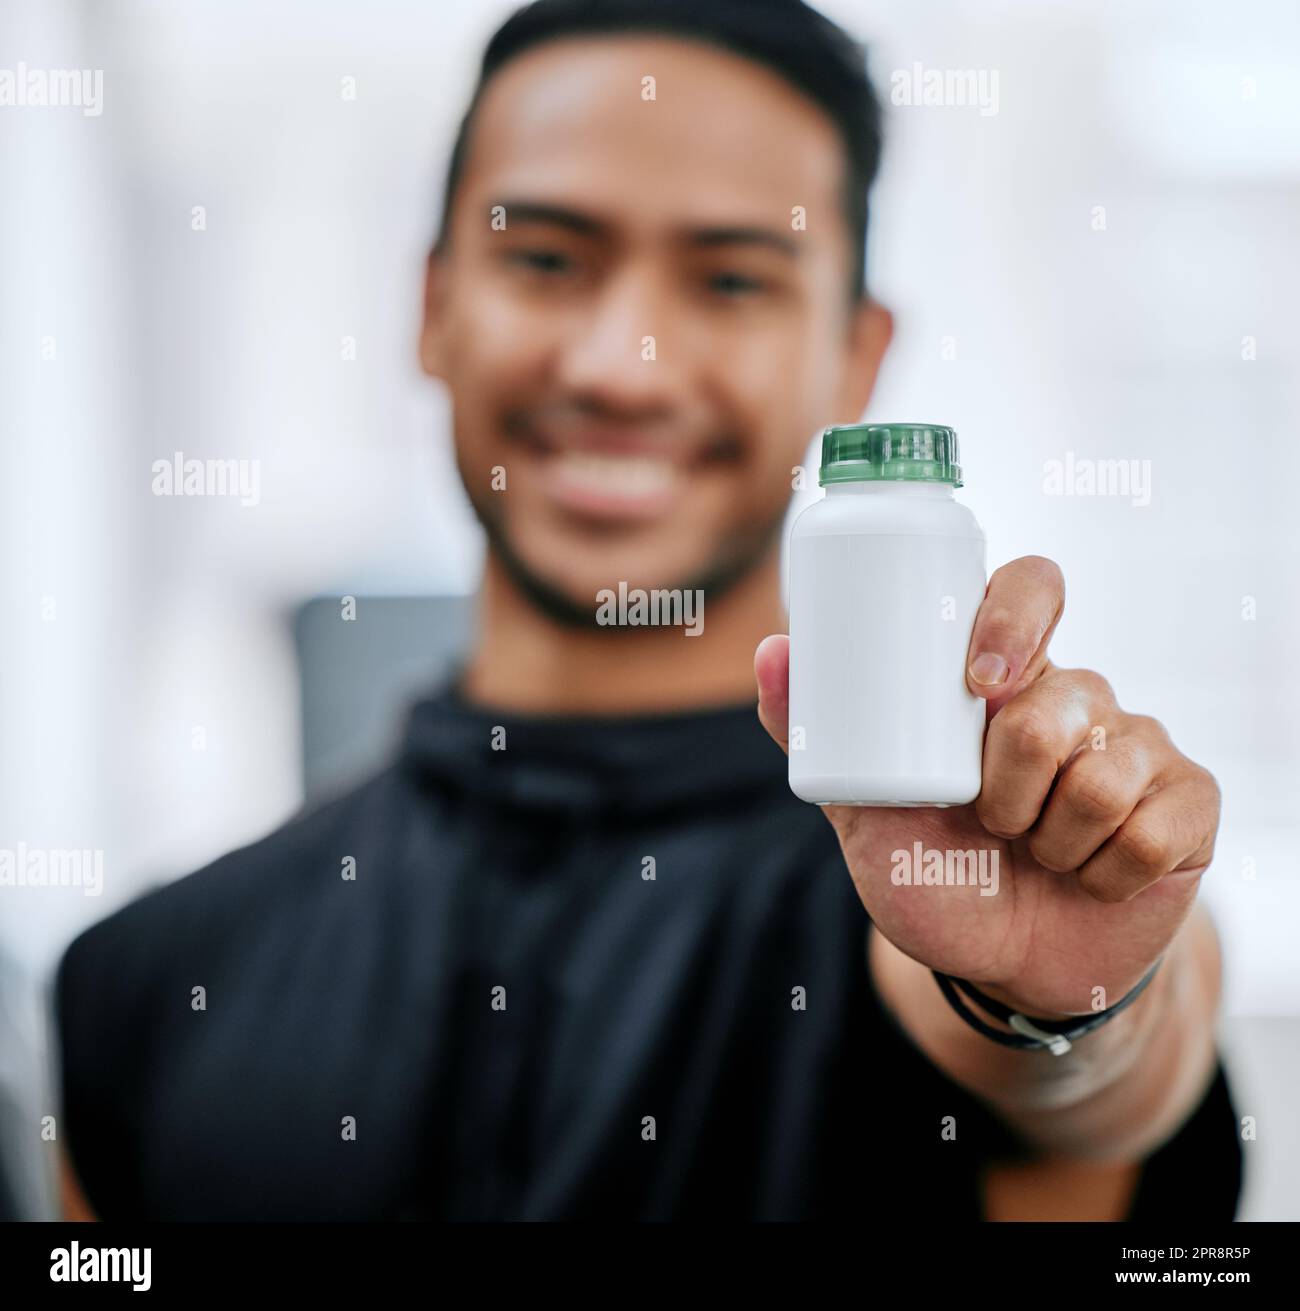 Blur smiling trainer alone in gym while holding and showing bottle of steroid pills. Asian coach with hormone enhancing drugs for workout in exercise health club. Bodybuilder man in fitness centre Stock Photo